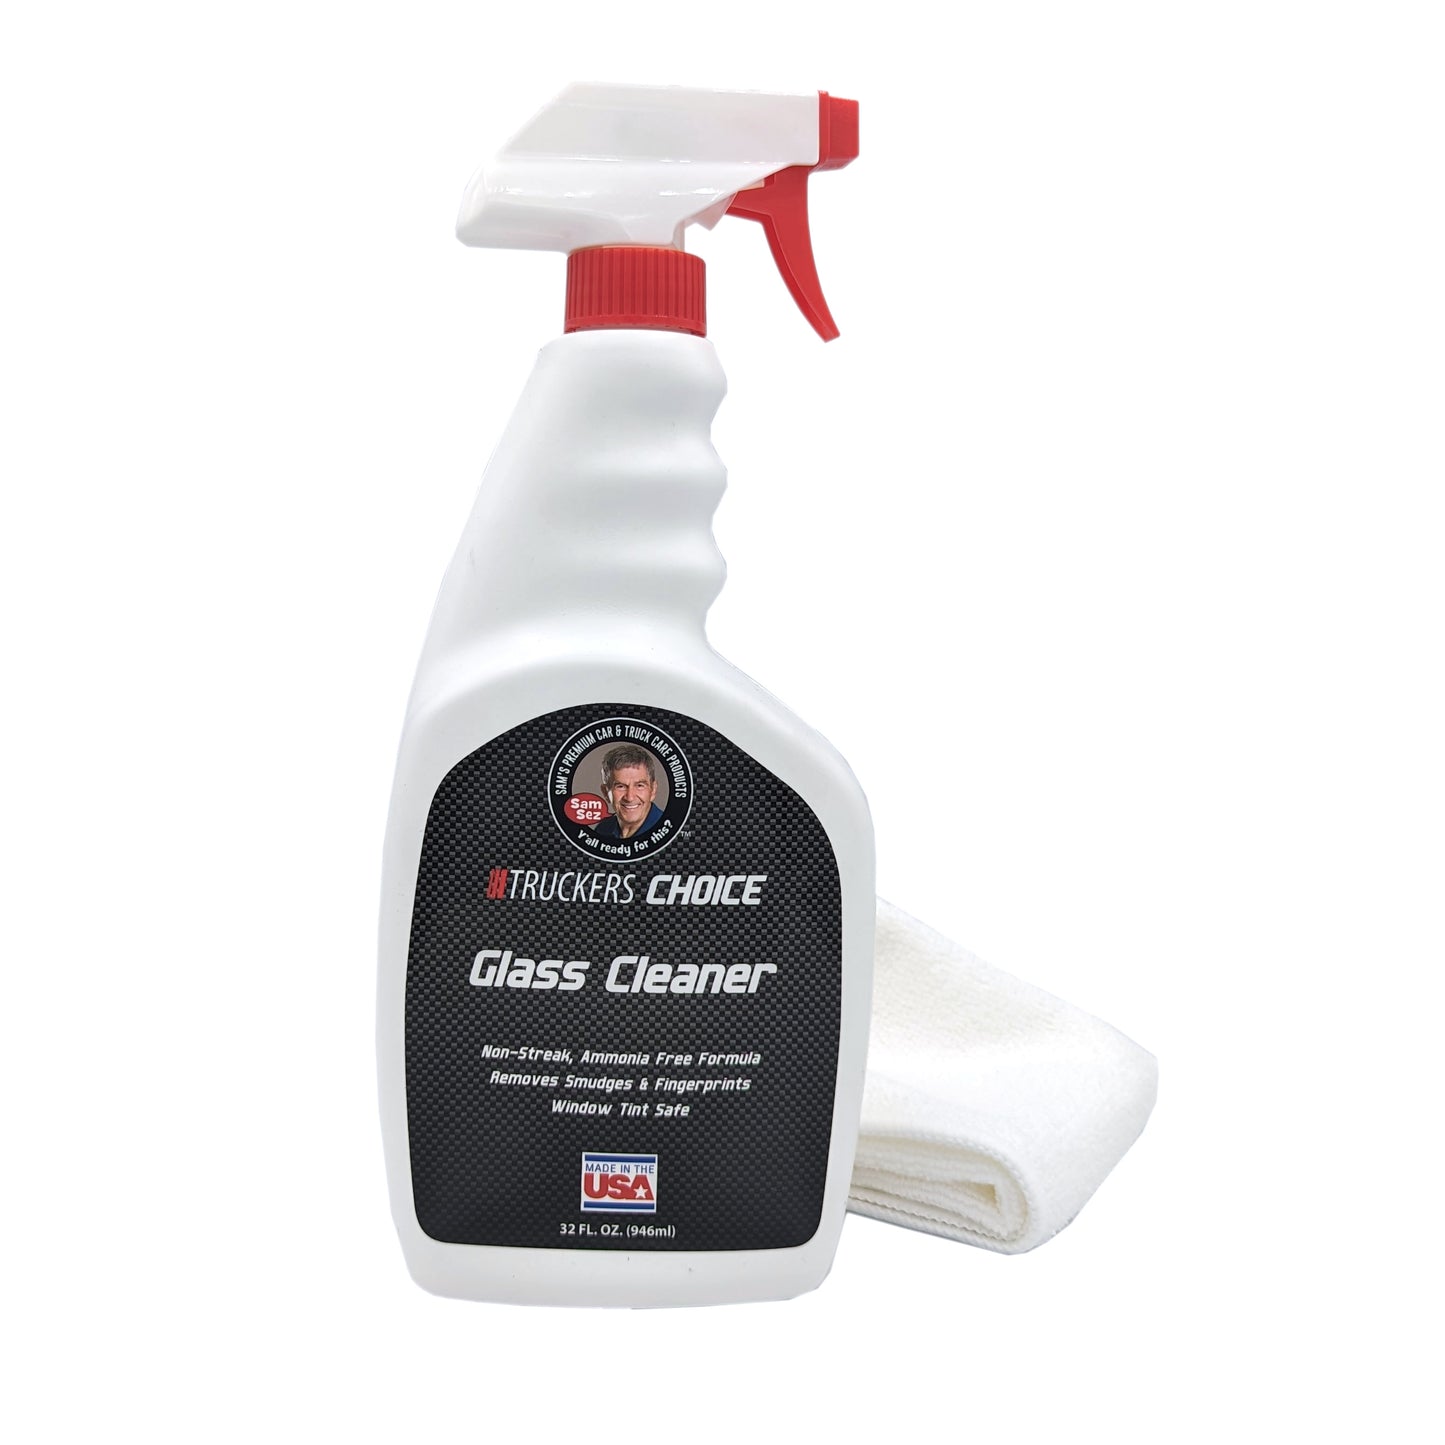 Truckers Choice Glass Cleaner with Microfiber